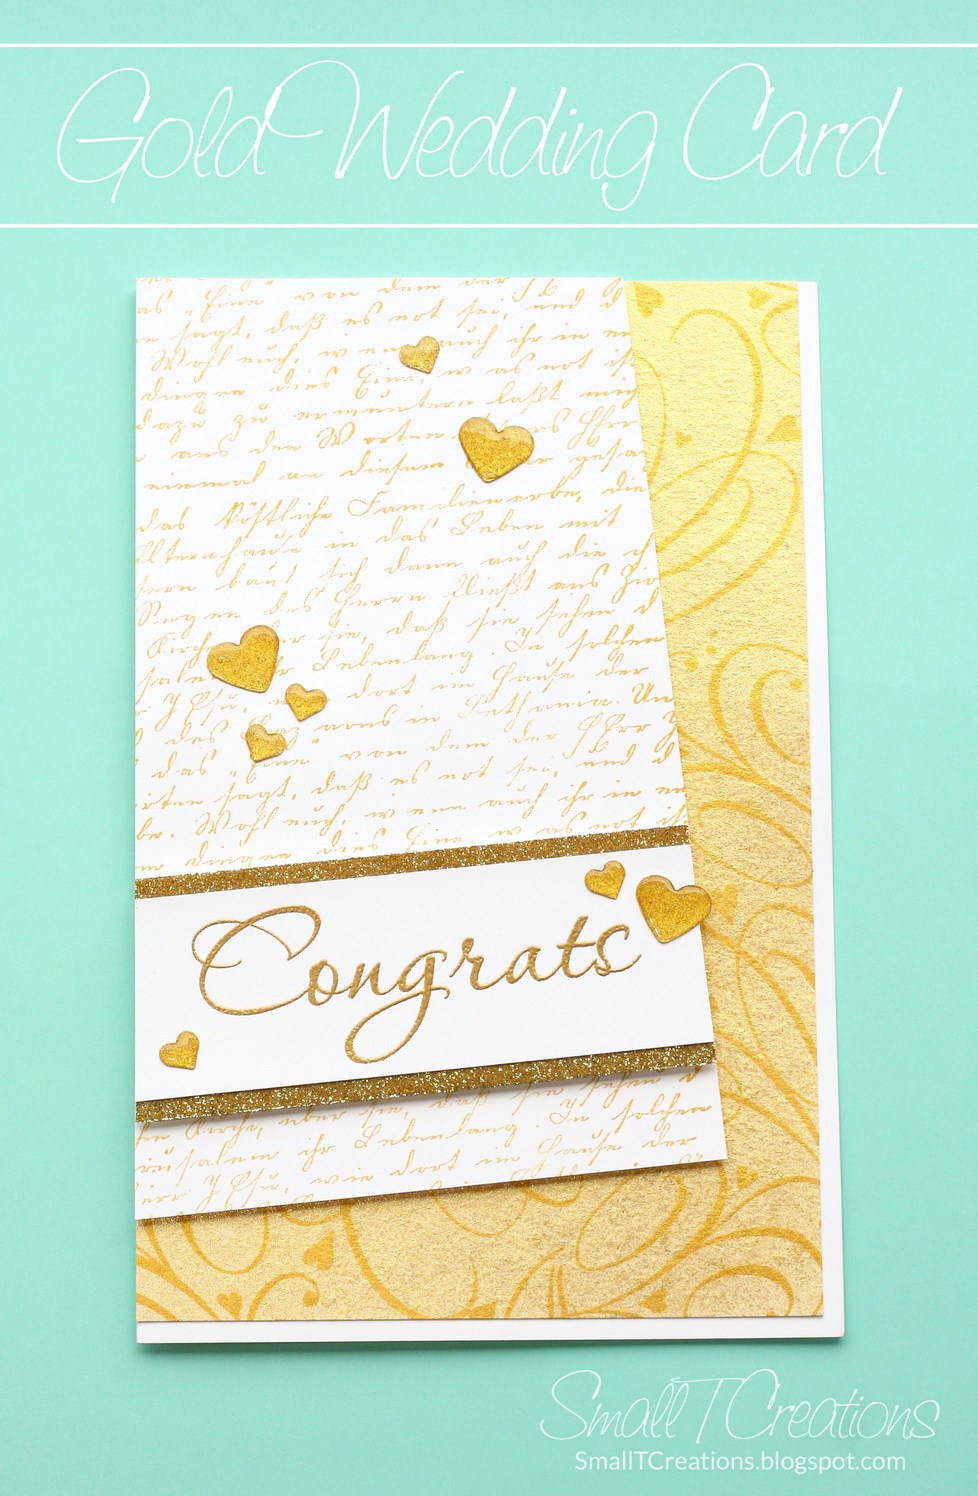 Gold Wedding Card with DIY Glitter Enamel Hearts | Small T Creations